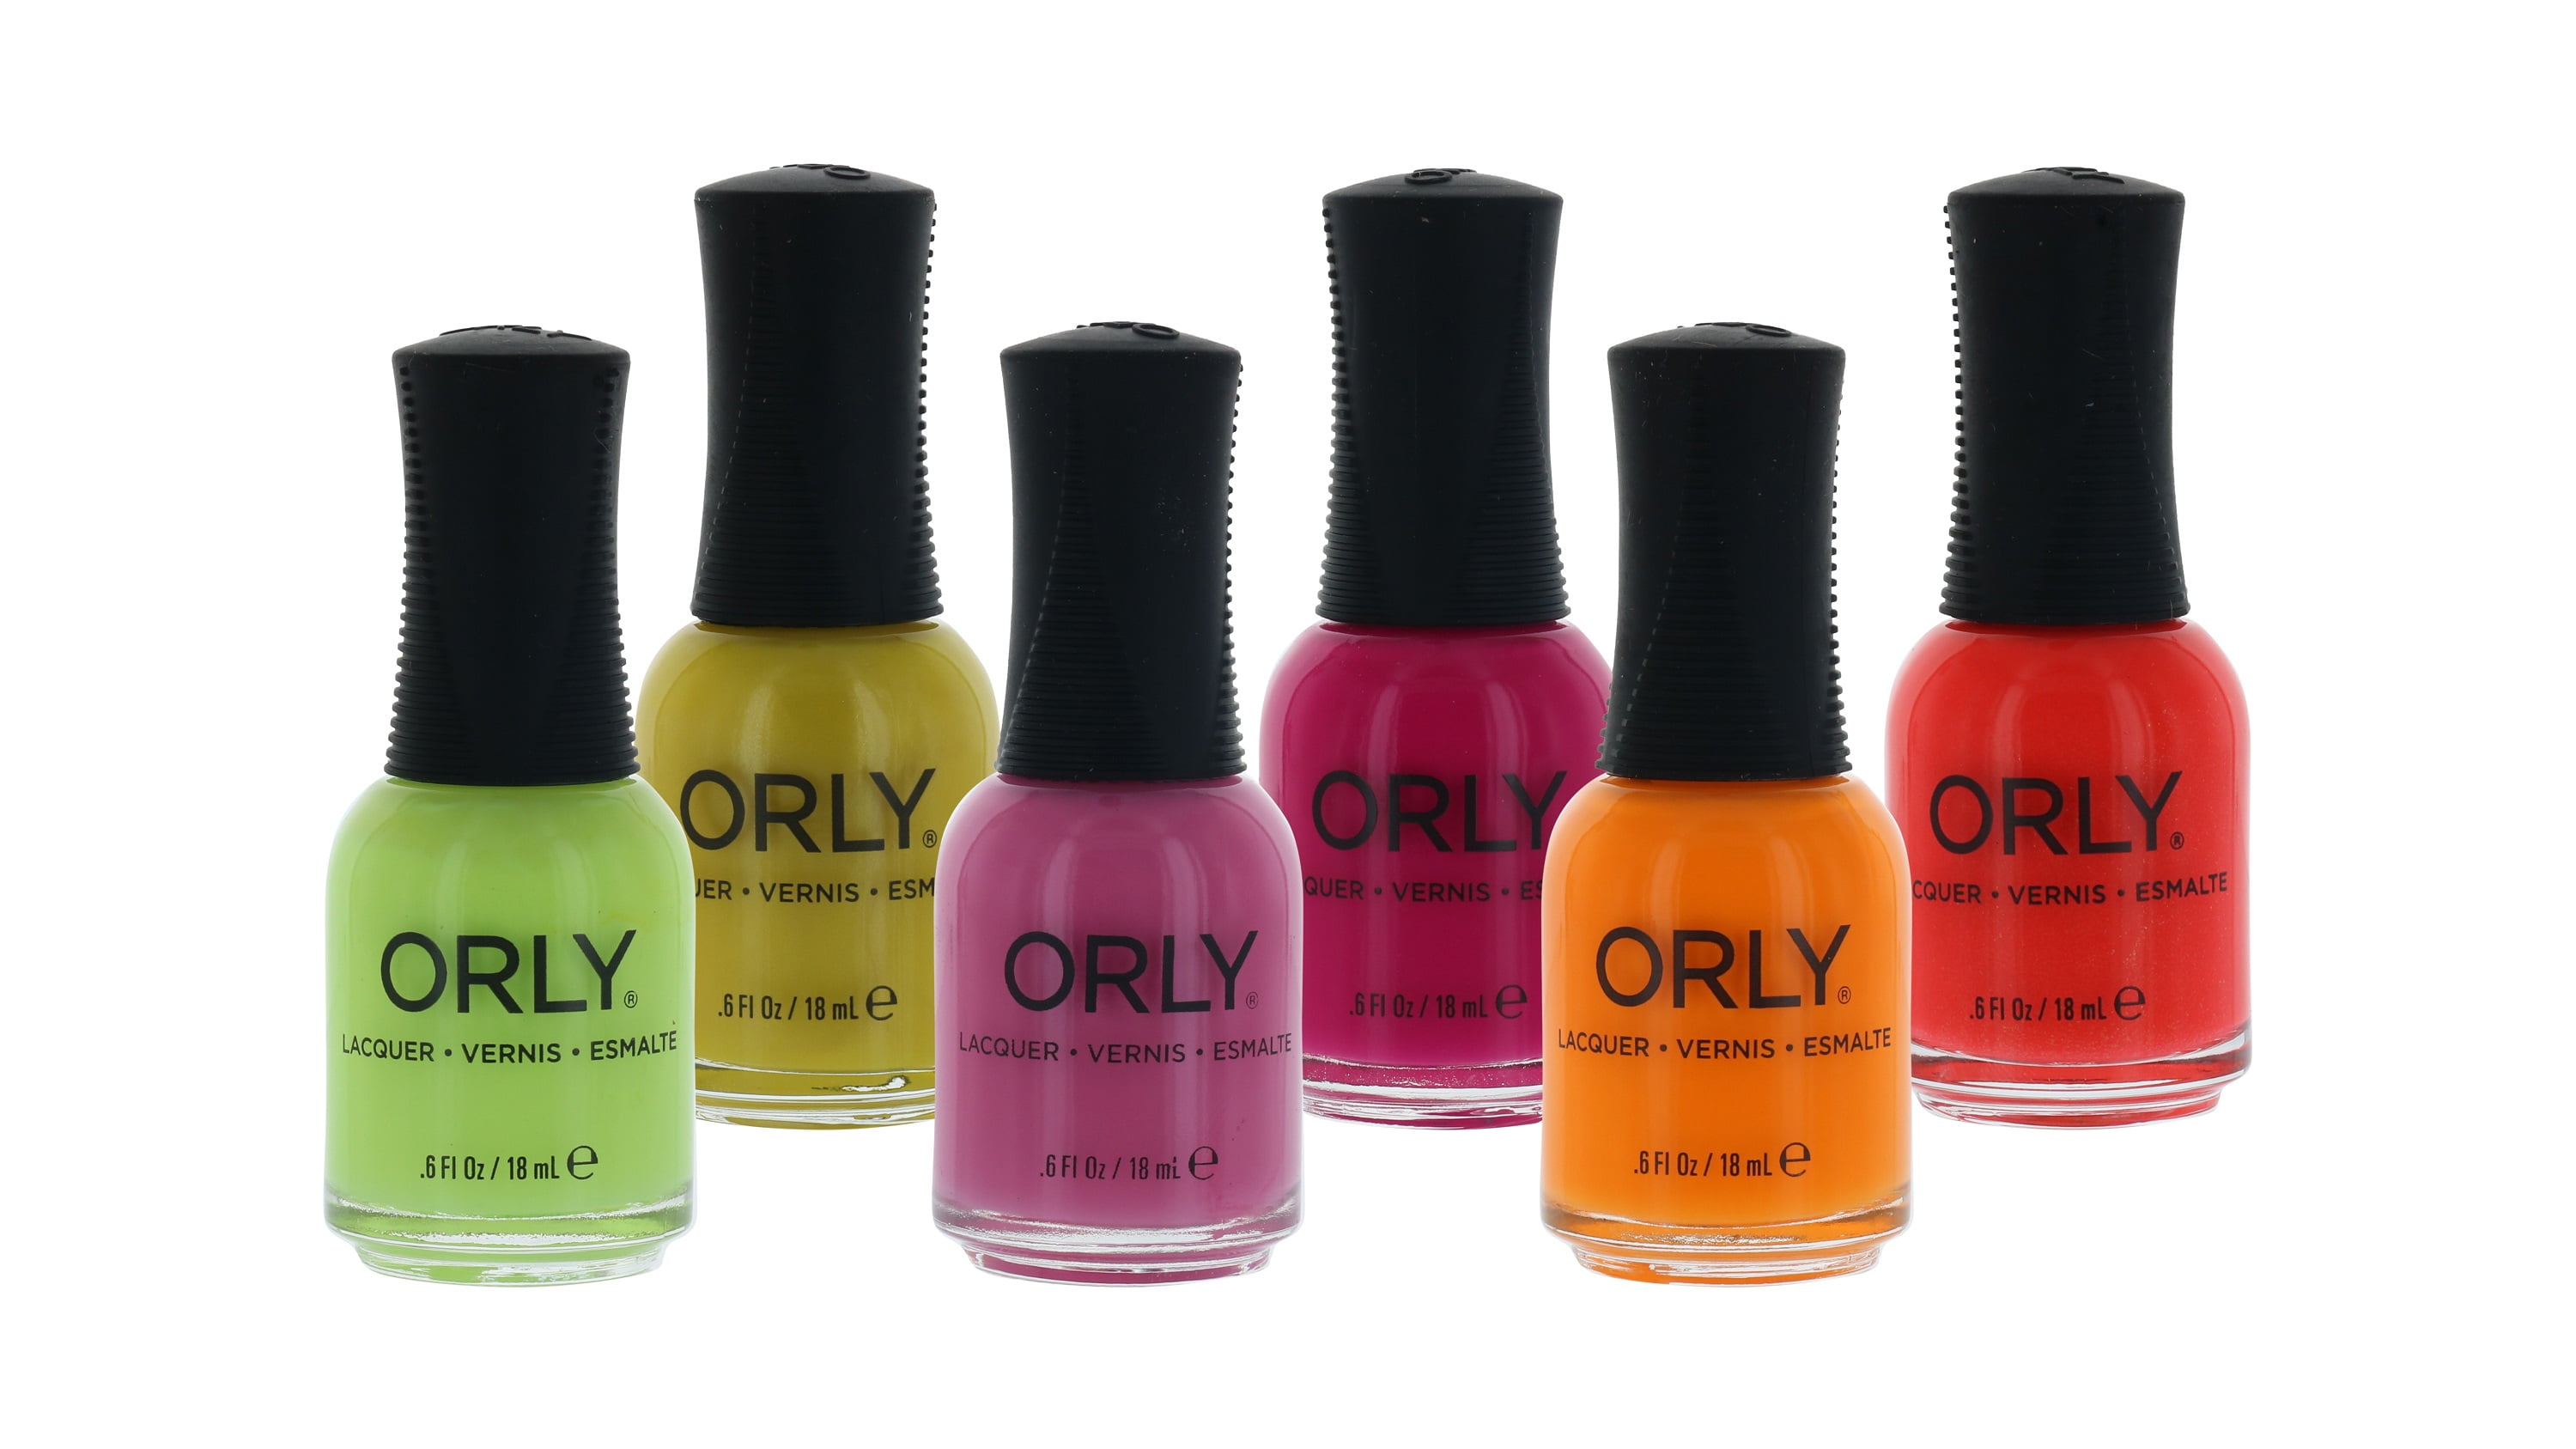 10. Orly Nail Lacquer in "Garnet" - wide 6